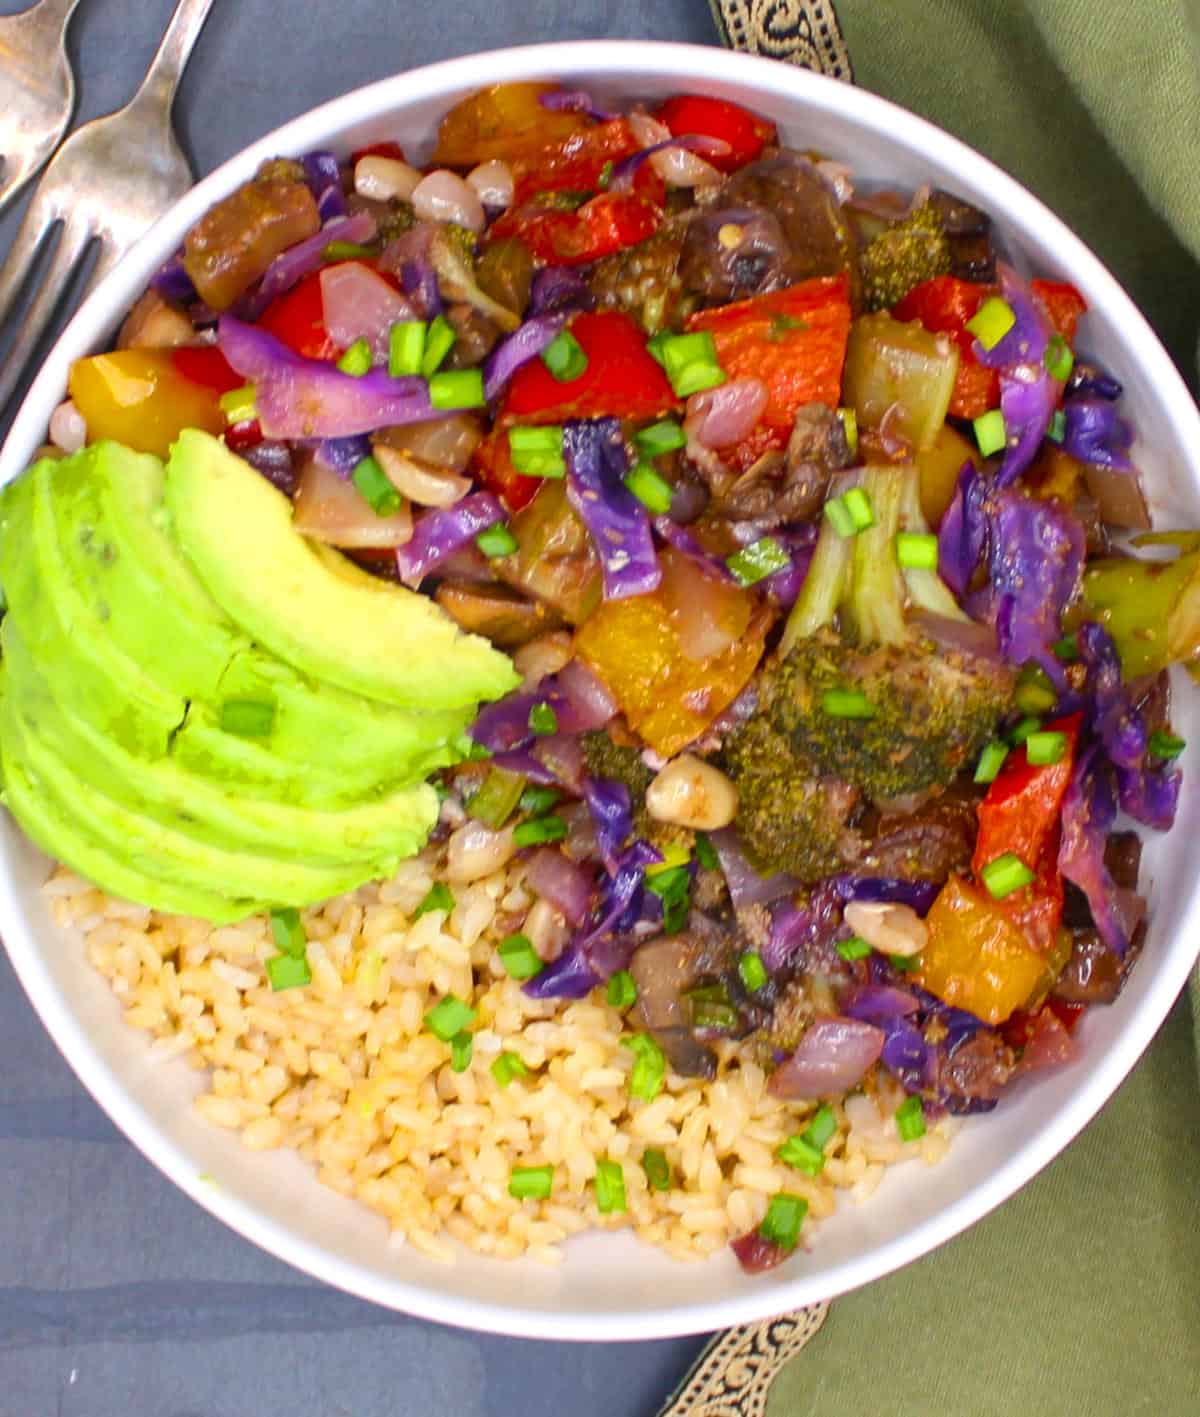 Kung pao veggies in bowl with brown rice and avocado.